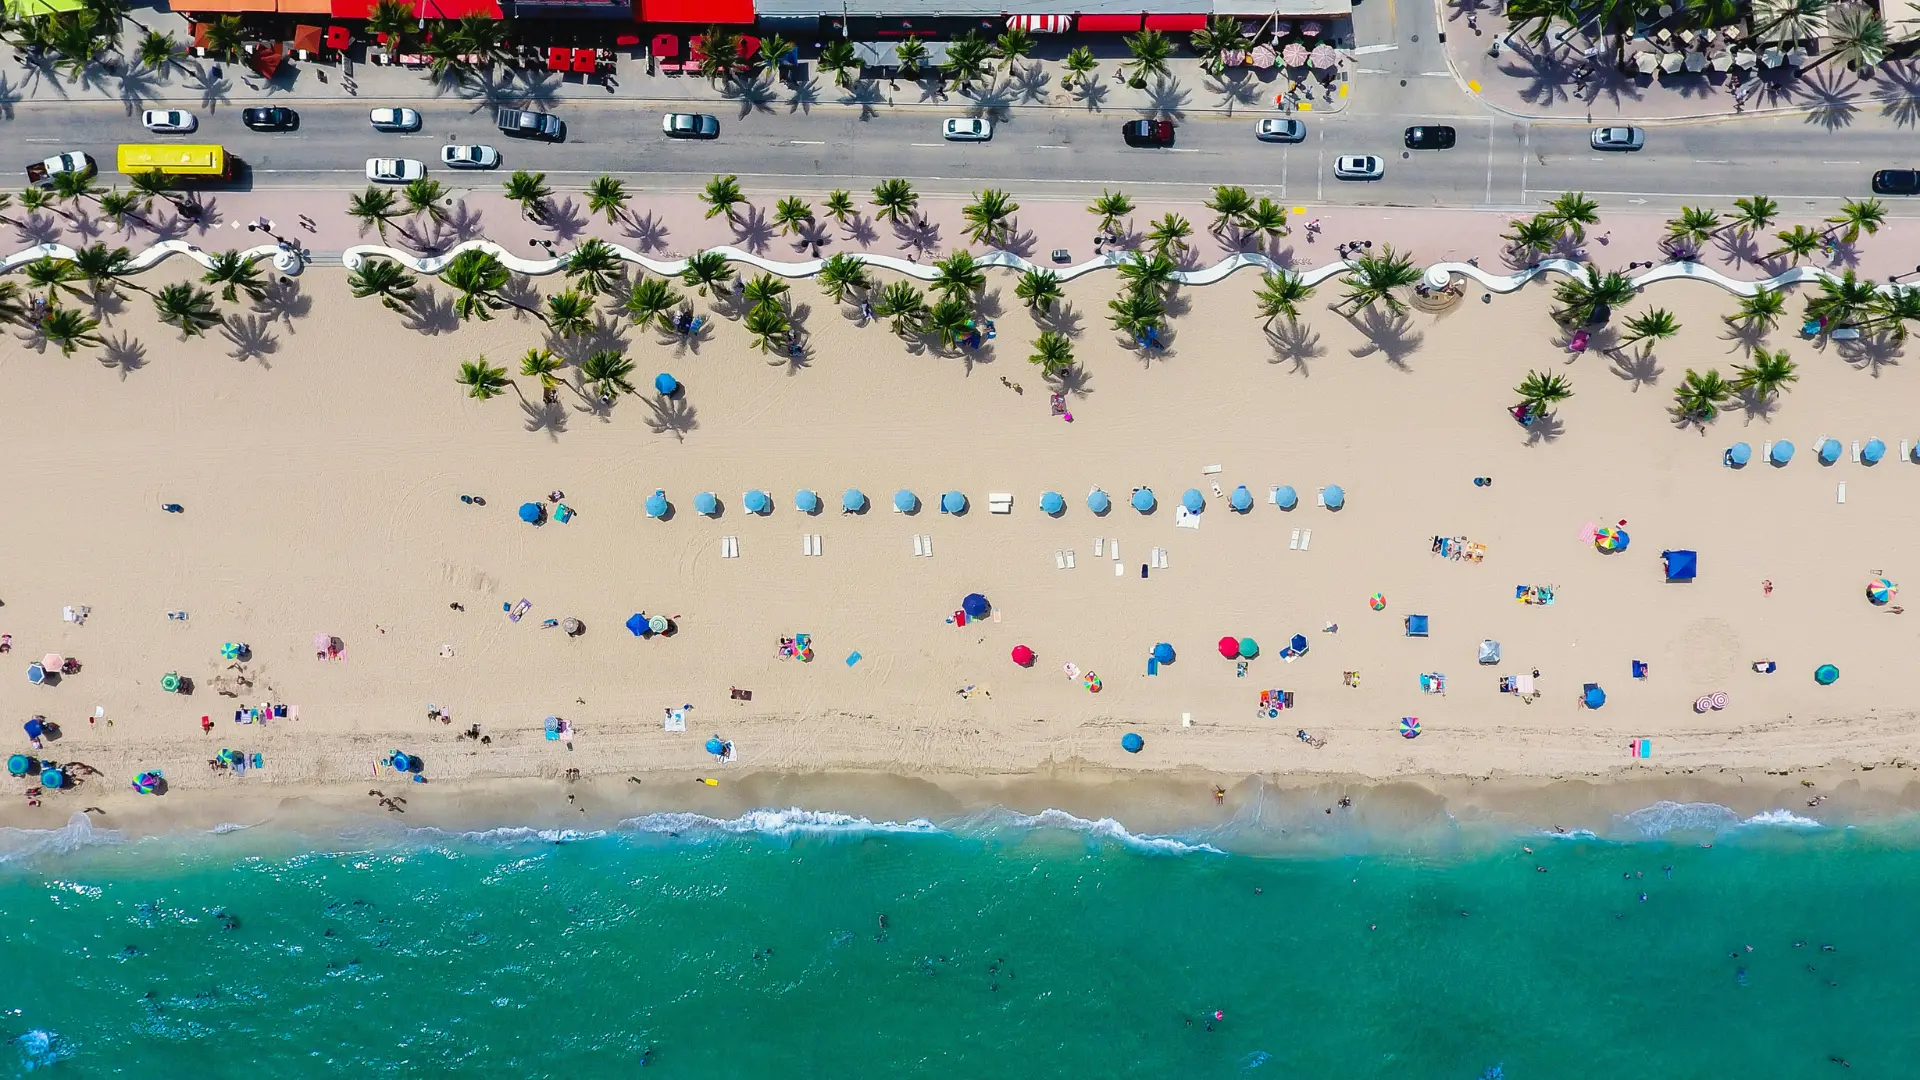 Visit Fort Lauderdale: The Venice of America